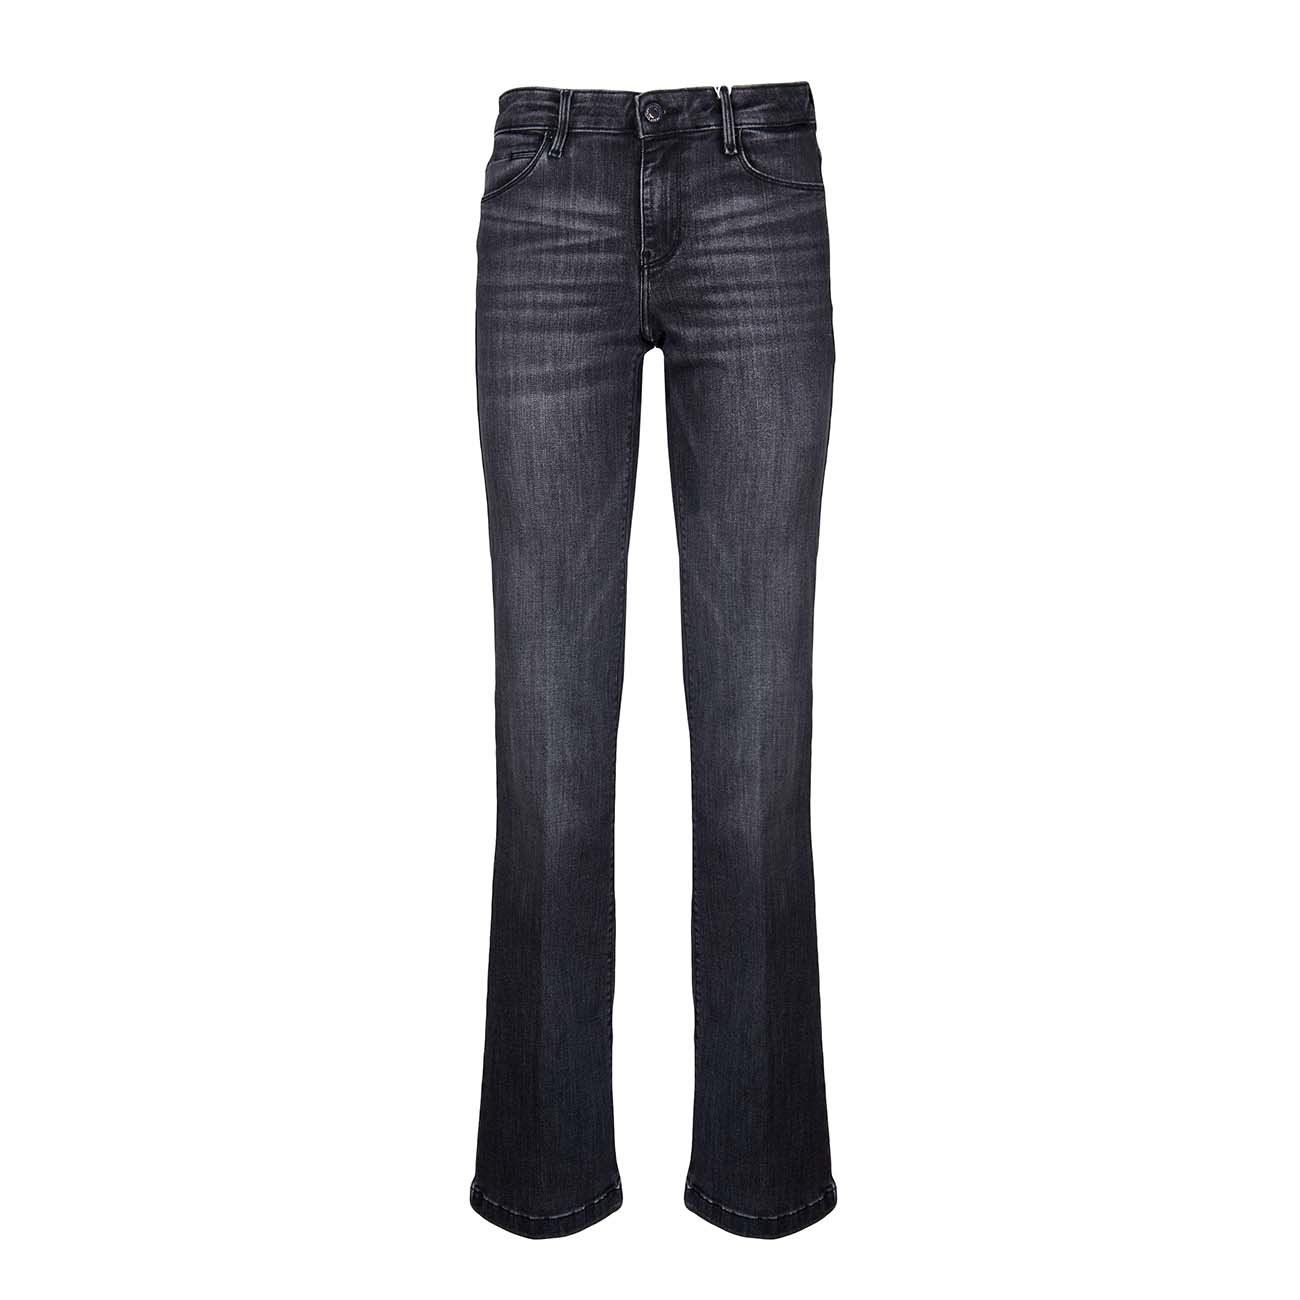 Guess Sexy Boot Jeans – BK's Brand Name Clothing